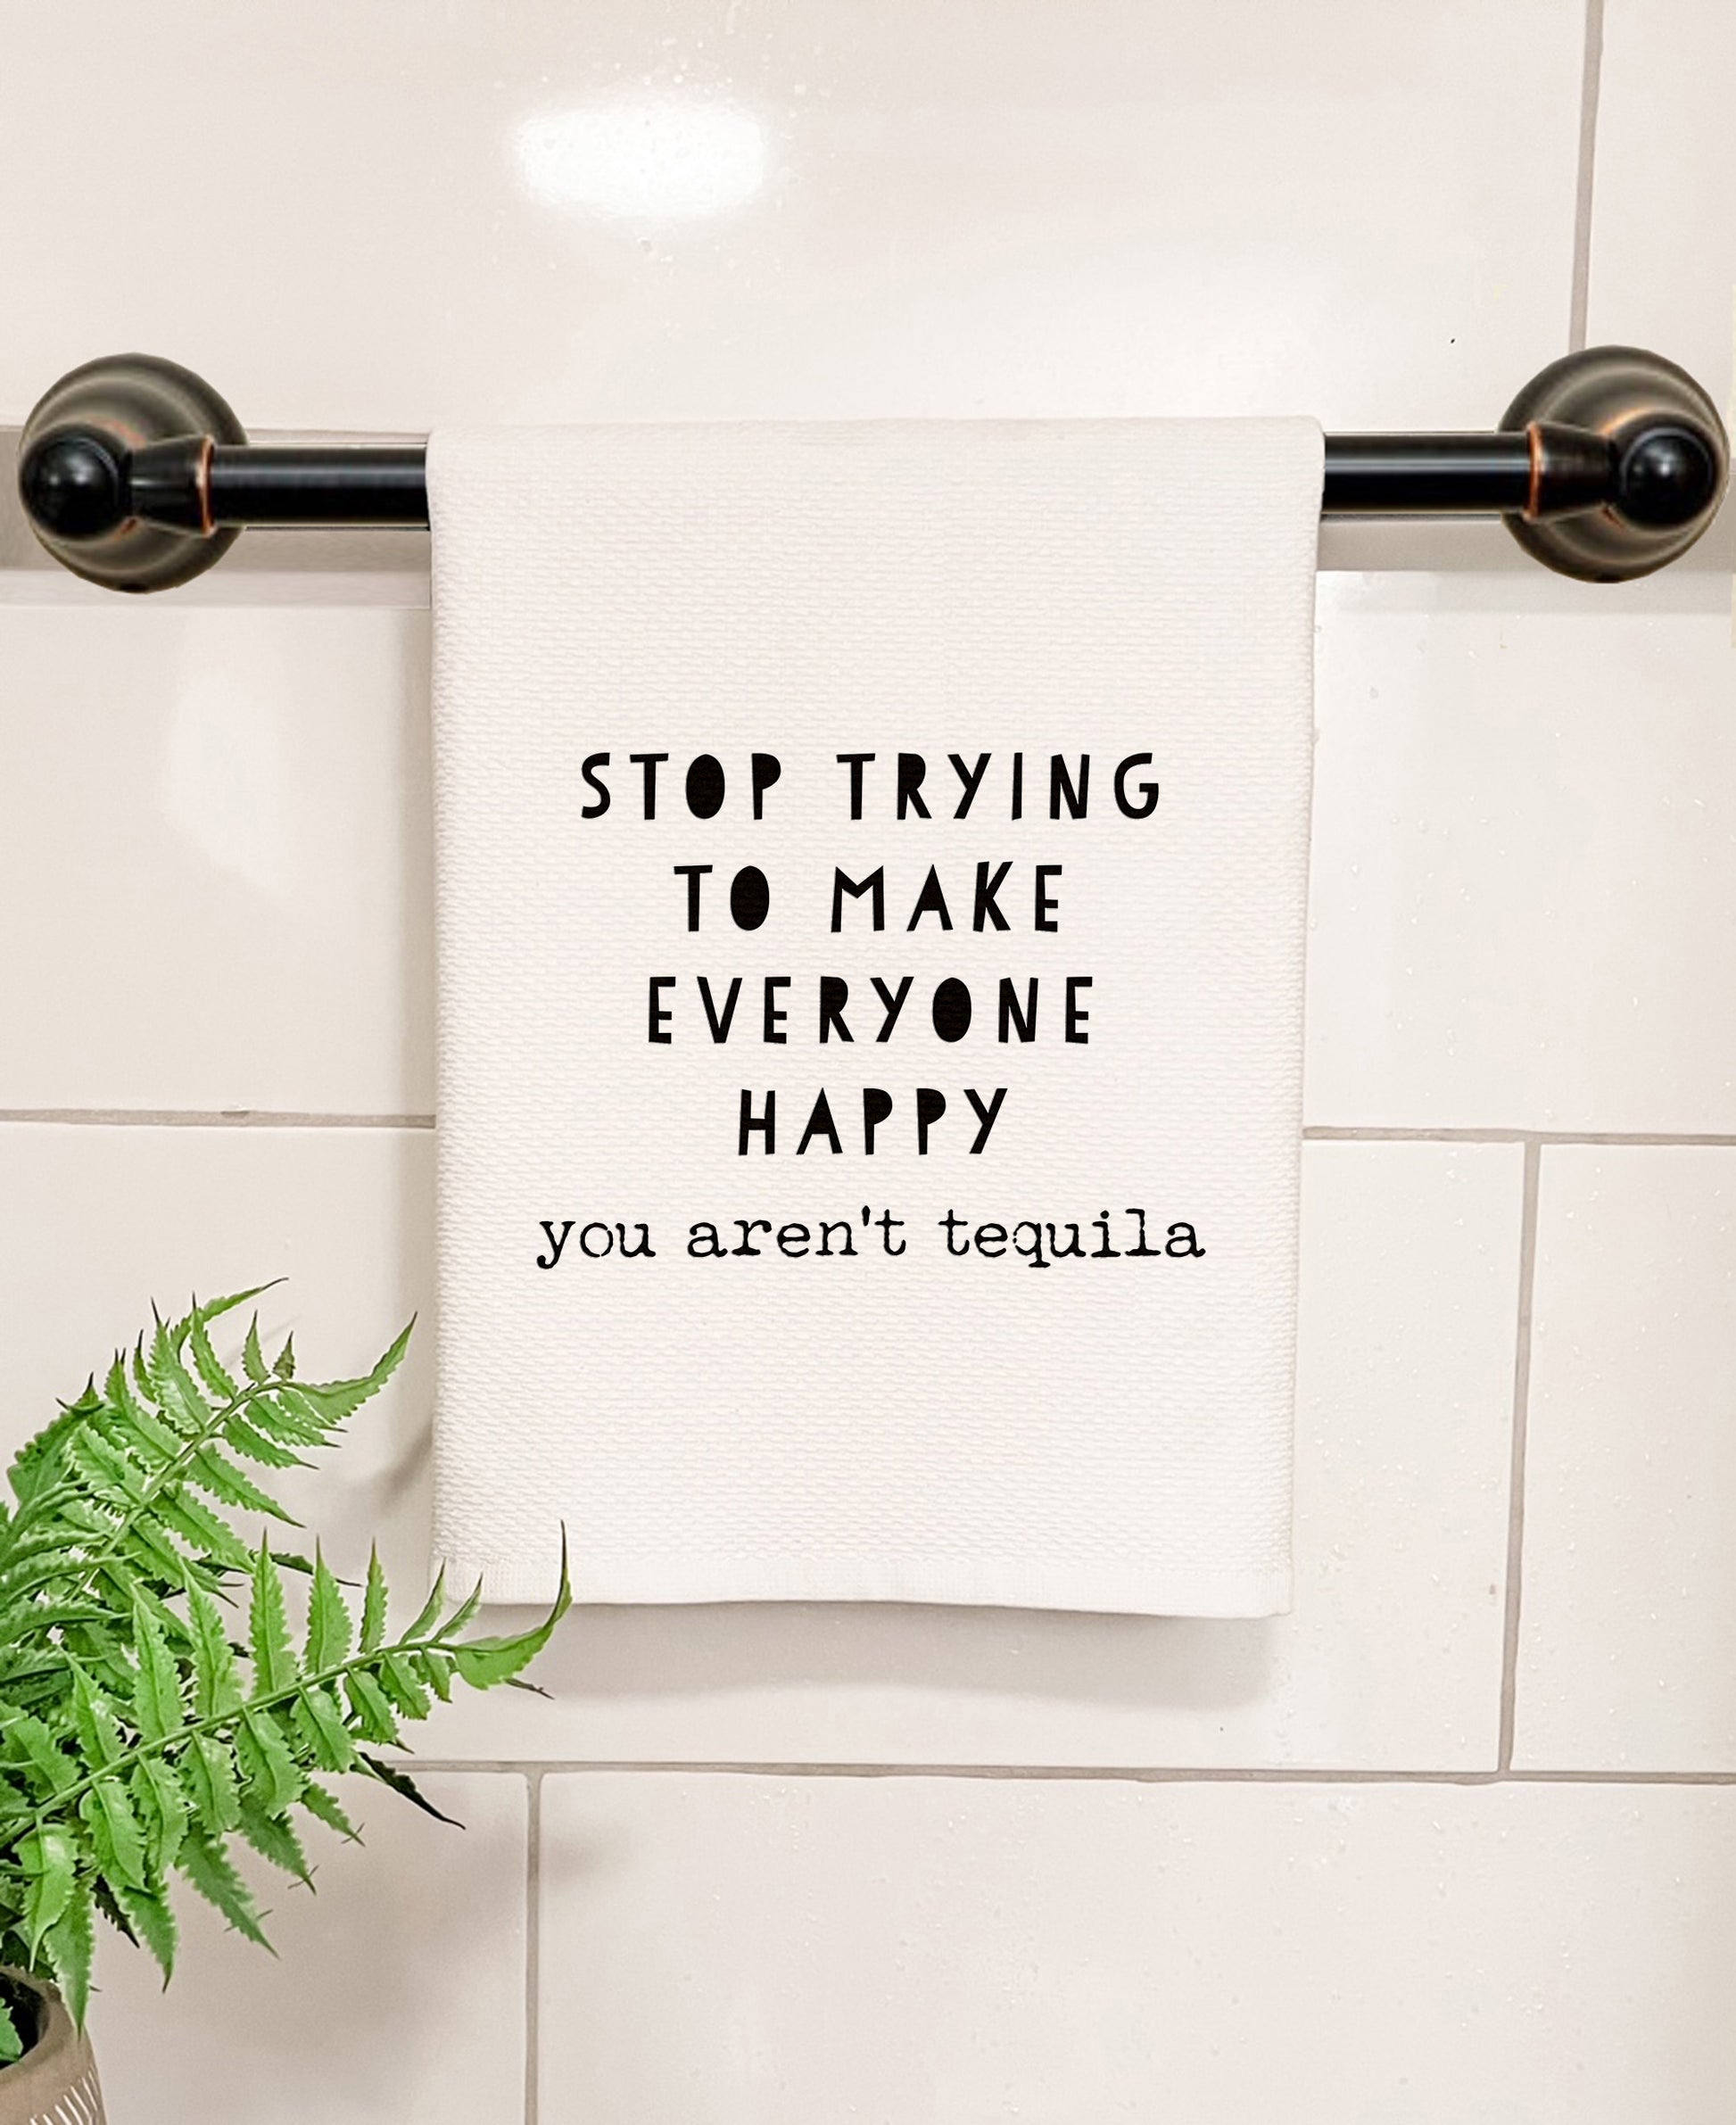 Stop Trying To Make Everyone Happy (You Aren't Tequila) - Kitchen/Bathroom Hand Towel (Waffle Weave) - MoonlightMakers